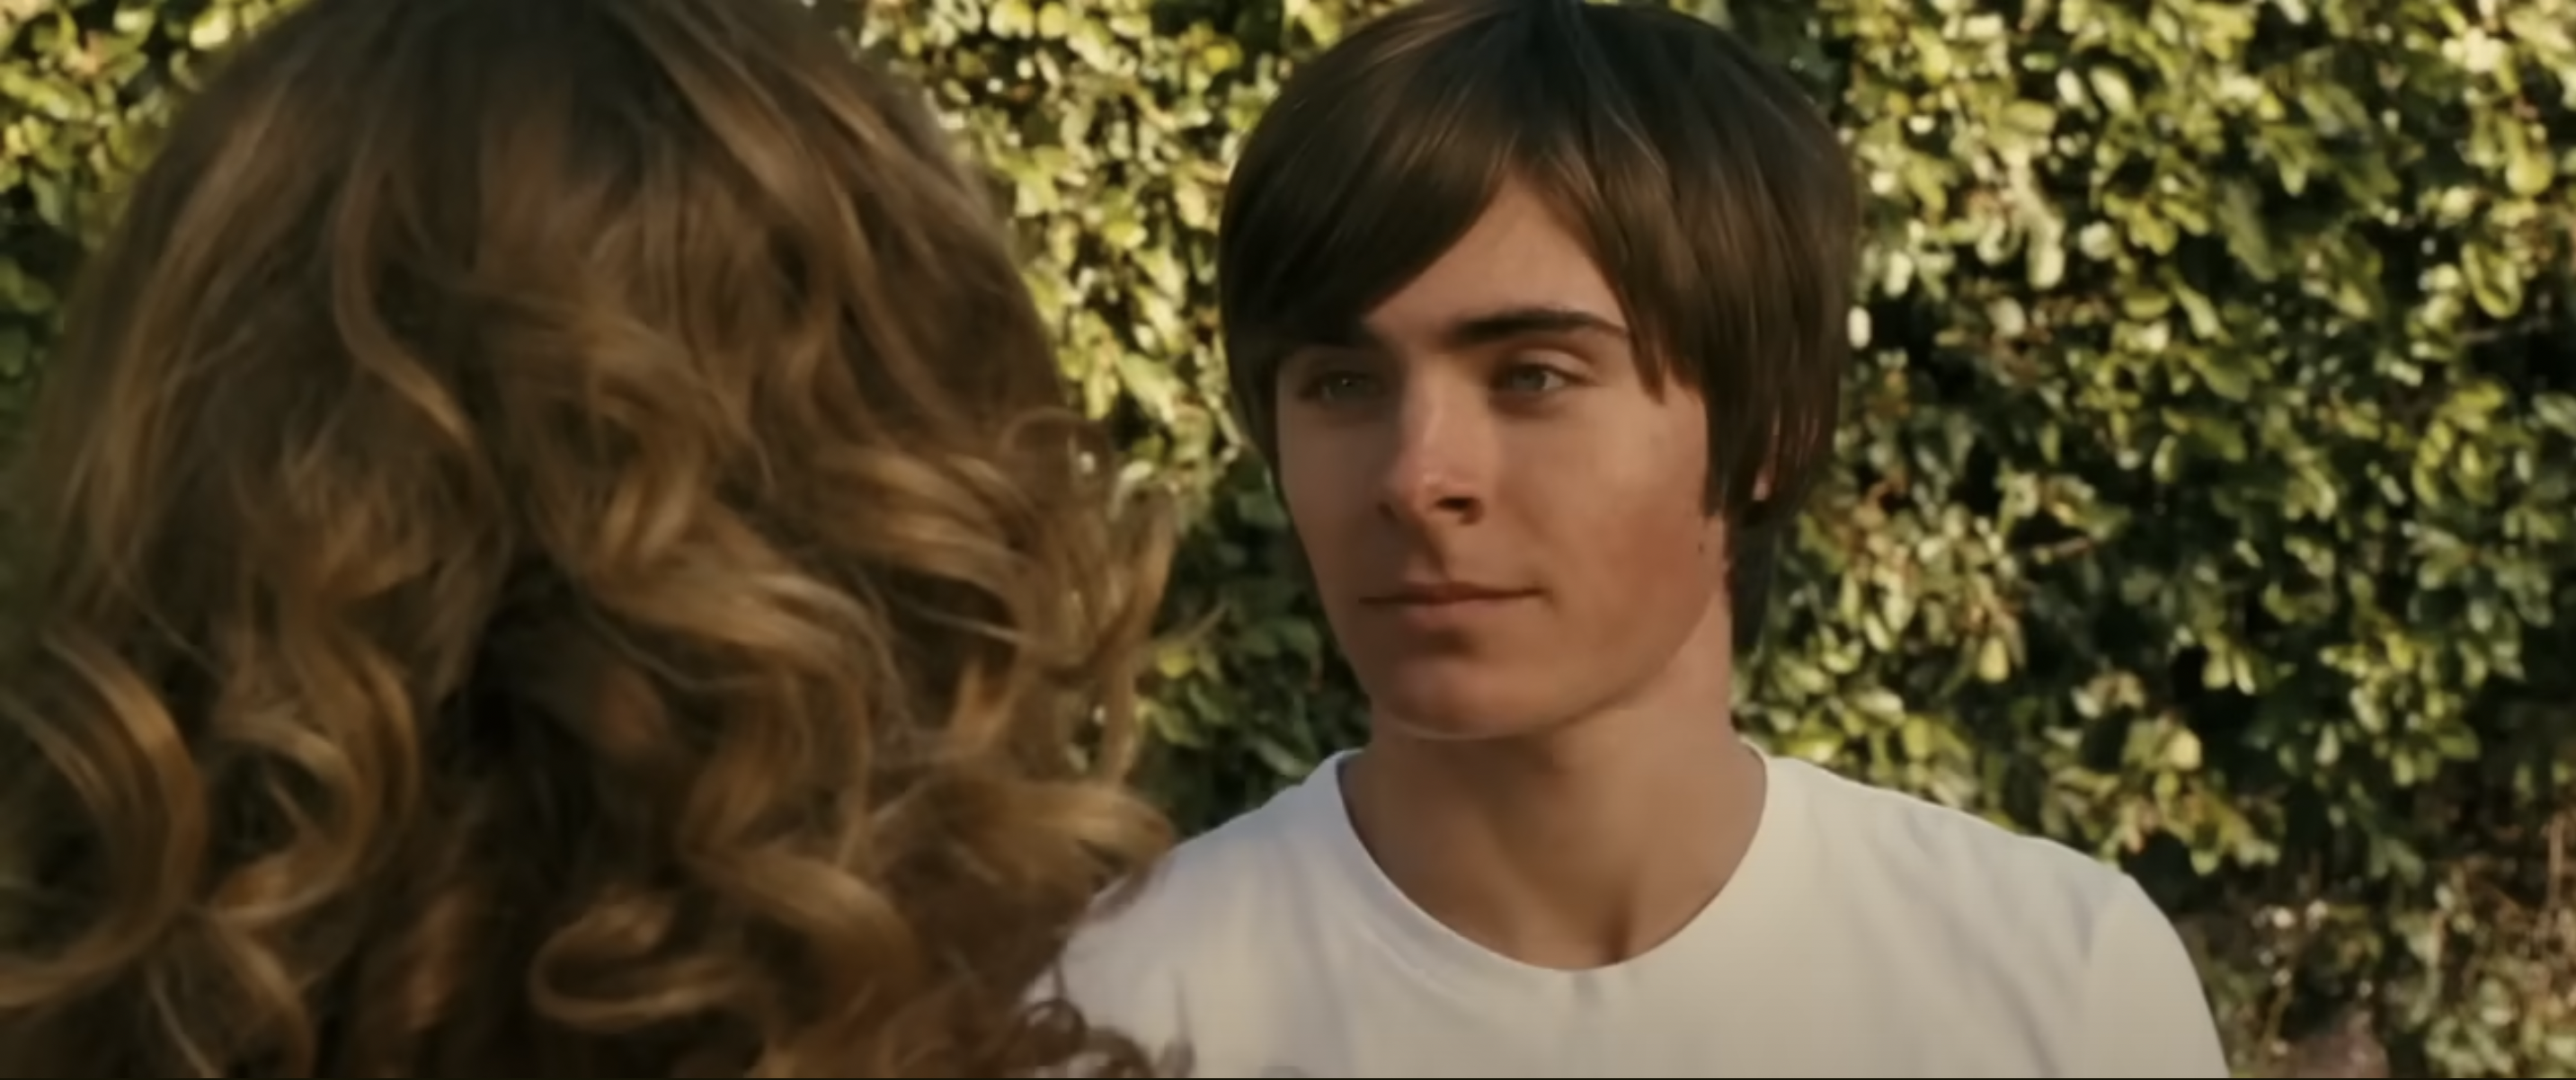 Zac Efron in the trailer of "17 Again" published on July 11, 2014 | Source: youtube/rottentomatoesclassictrailers